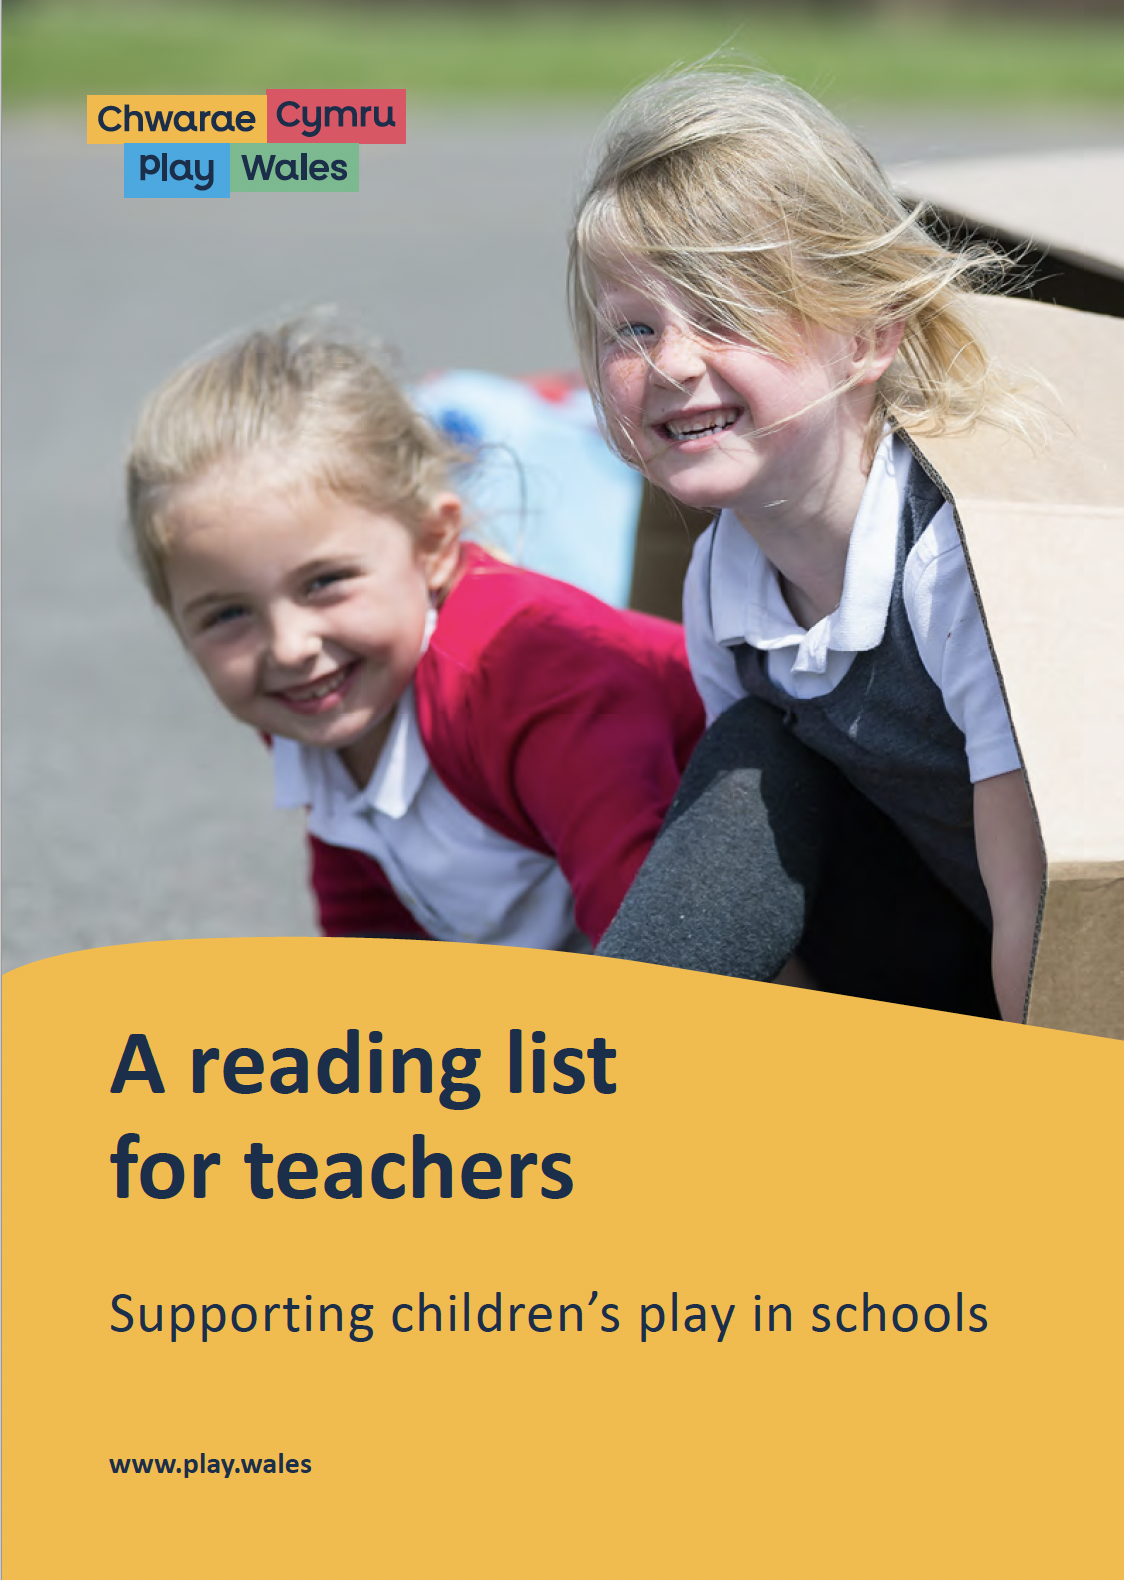 Reading list for teachers – Supporting children’s play in schools